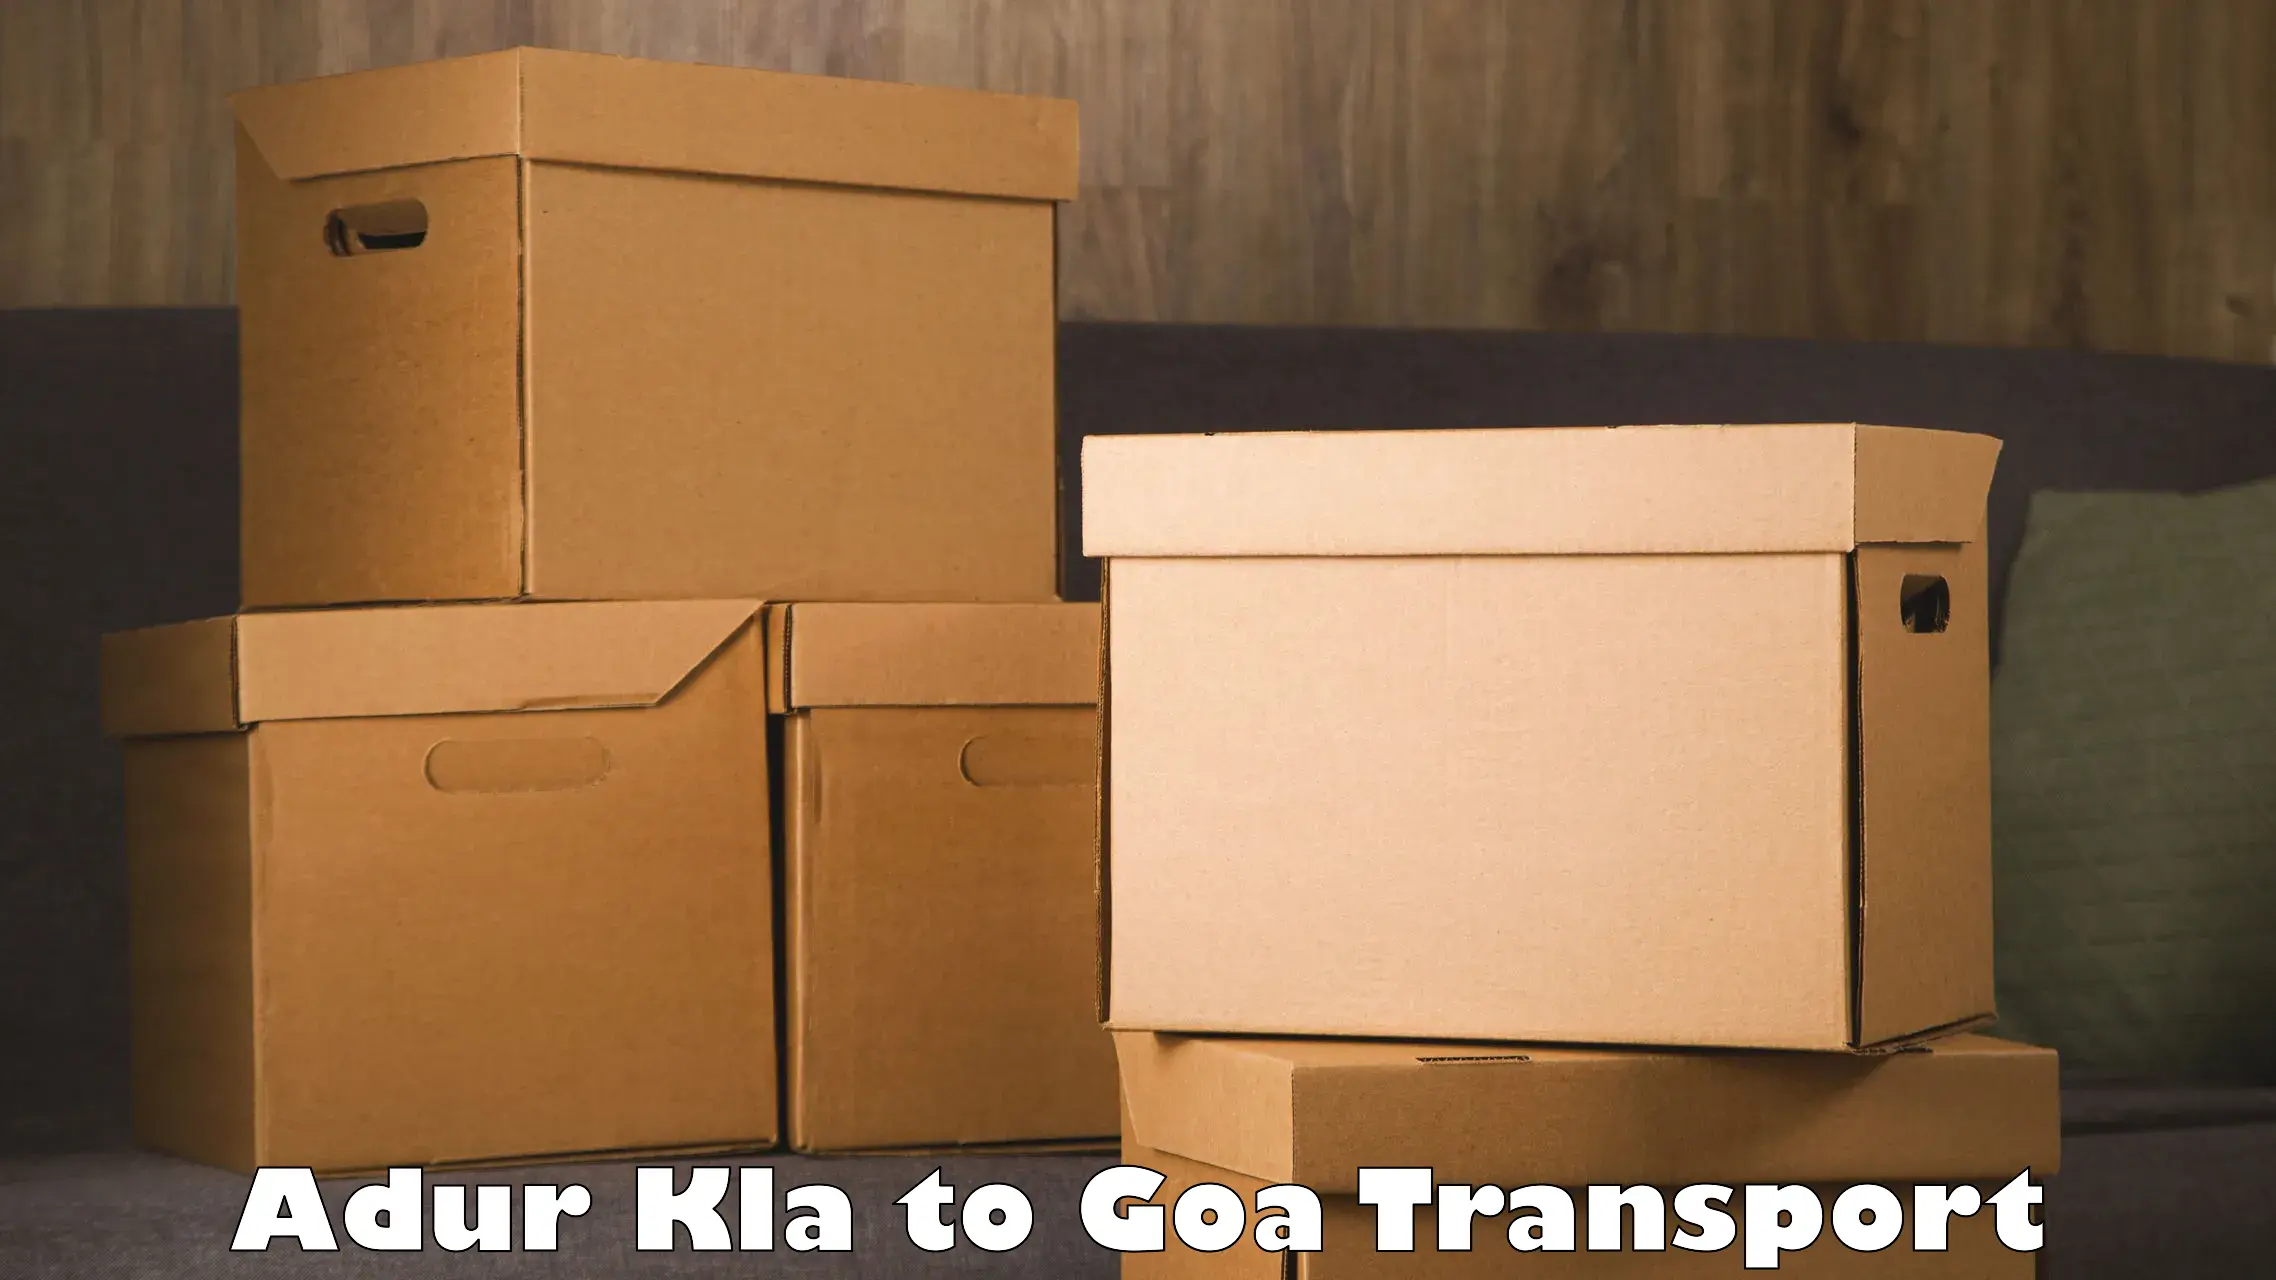 Transport bike from one state to another Adur Kla to Goa